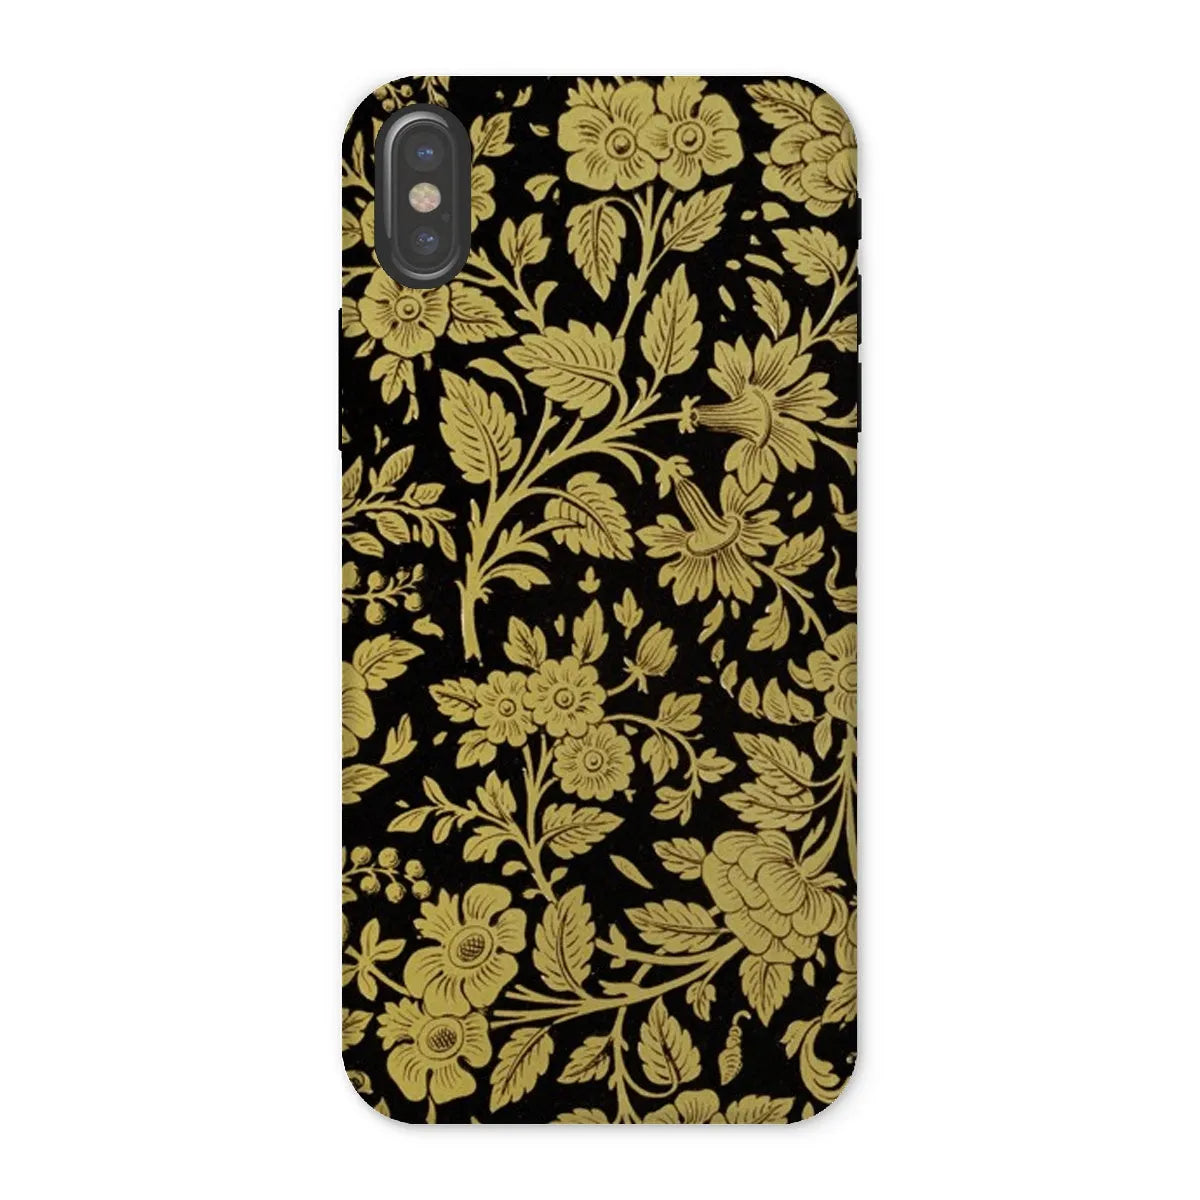 Indian Gold Lacquer - Aesthetic Pattern Art Phone Case - Iphone x / Matte - Mobile Phone Cases - Aesthetic Art